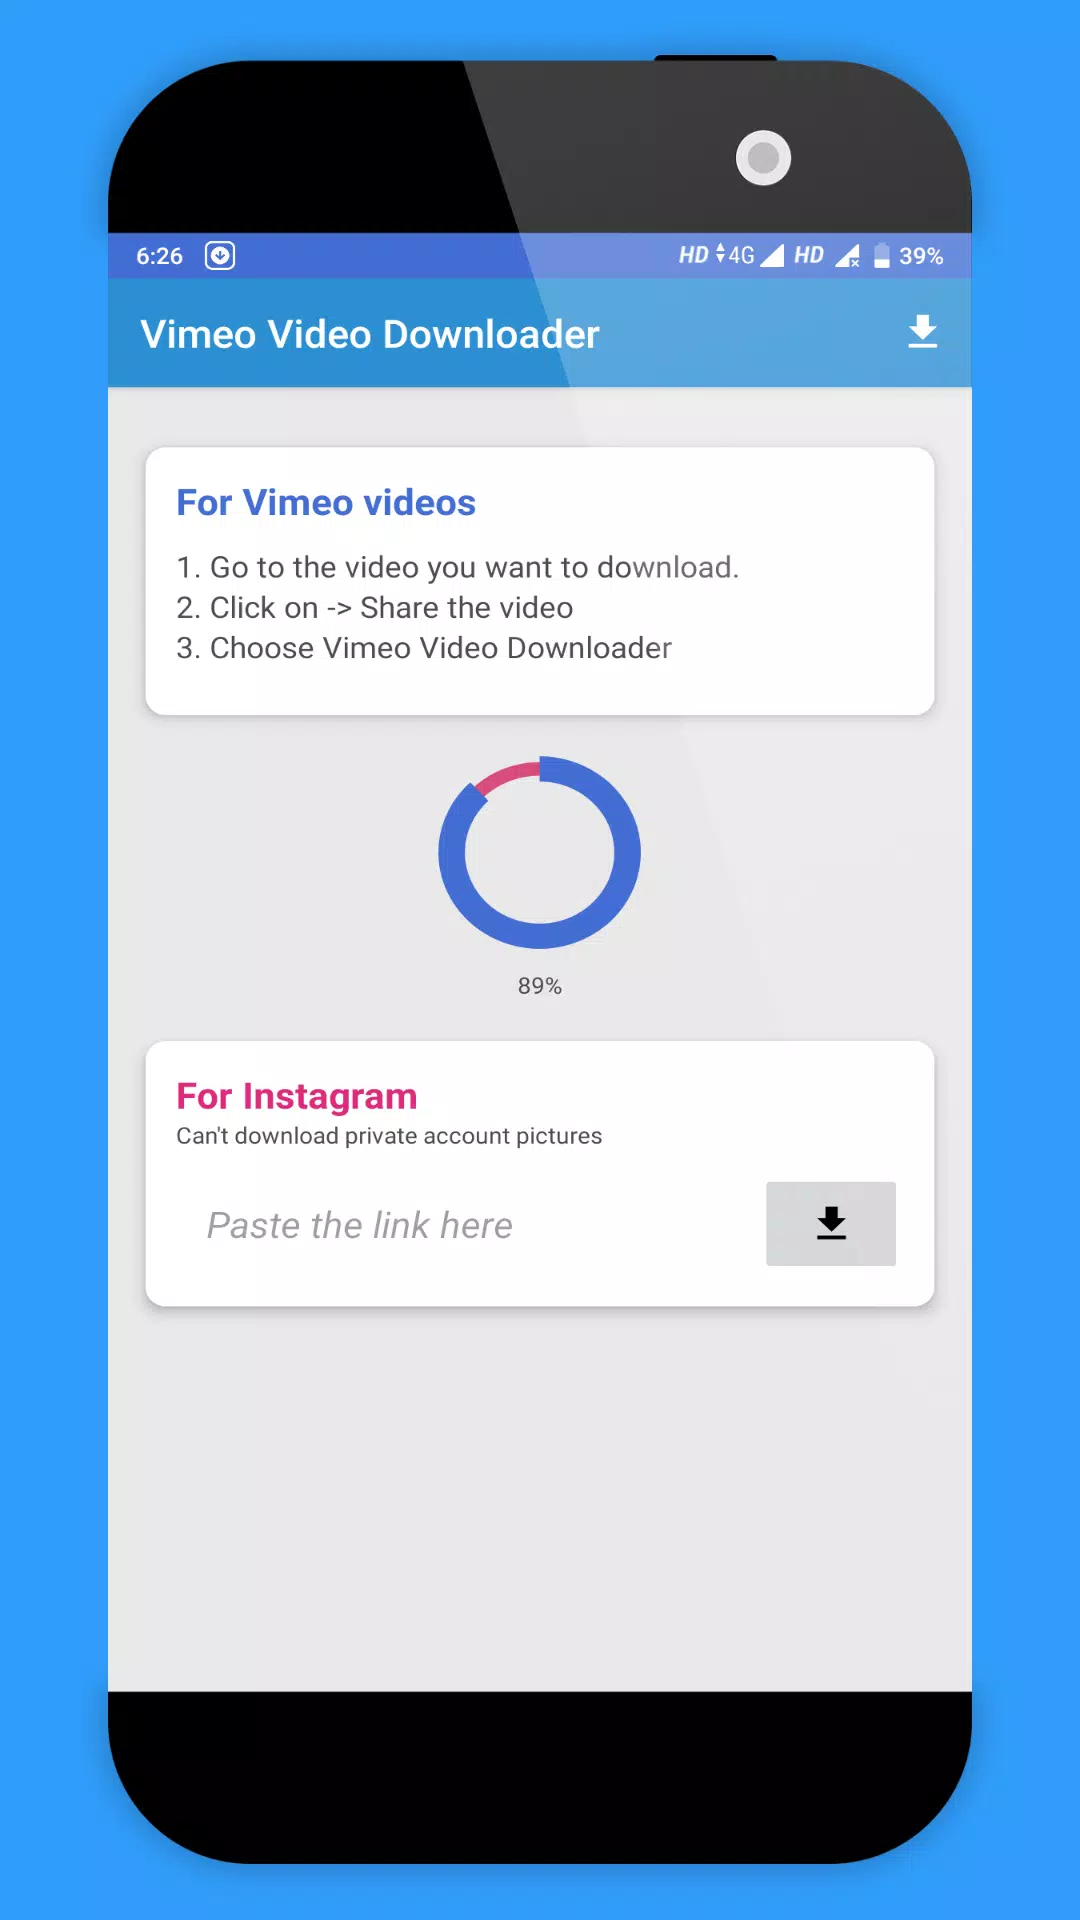 Download vimeo video to phone instagram how to download pdf in canva